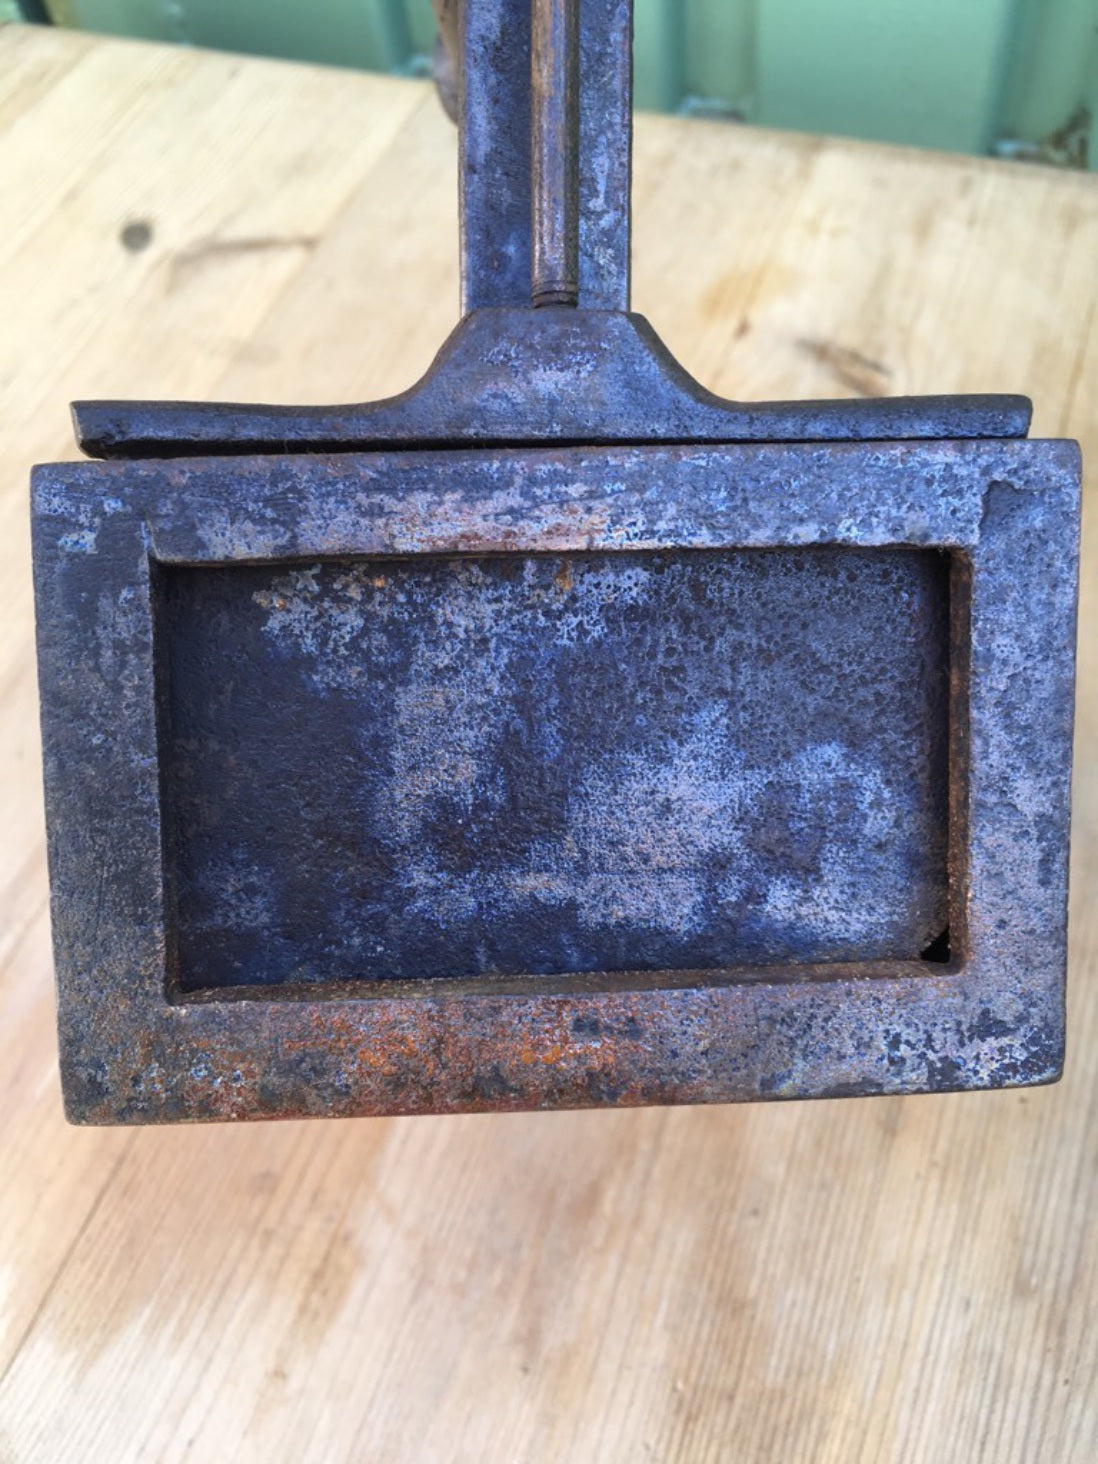 Interesting Collectable Rare Old Cast Iron Flat Hot Iron For Clothes 17x15.4cm